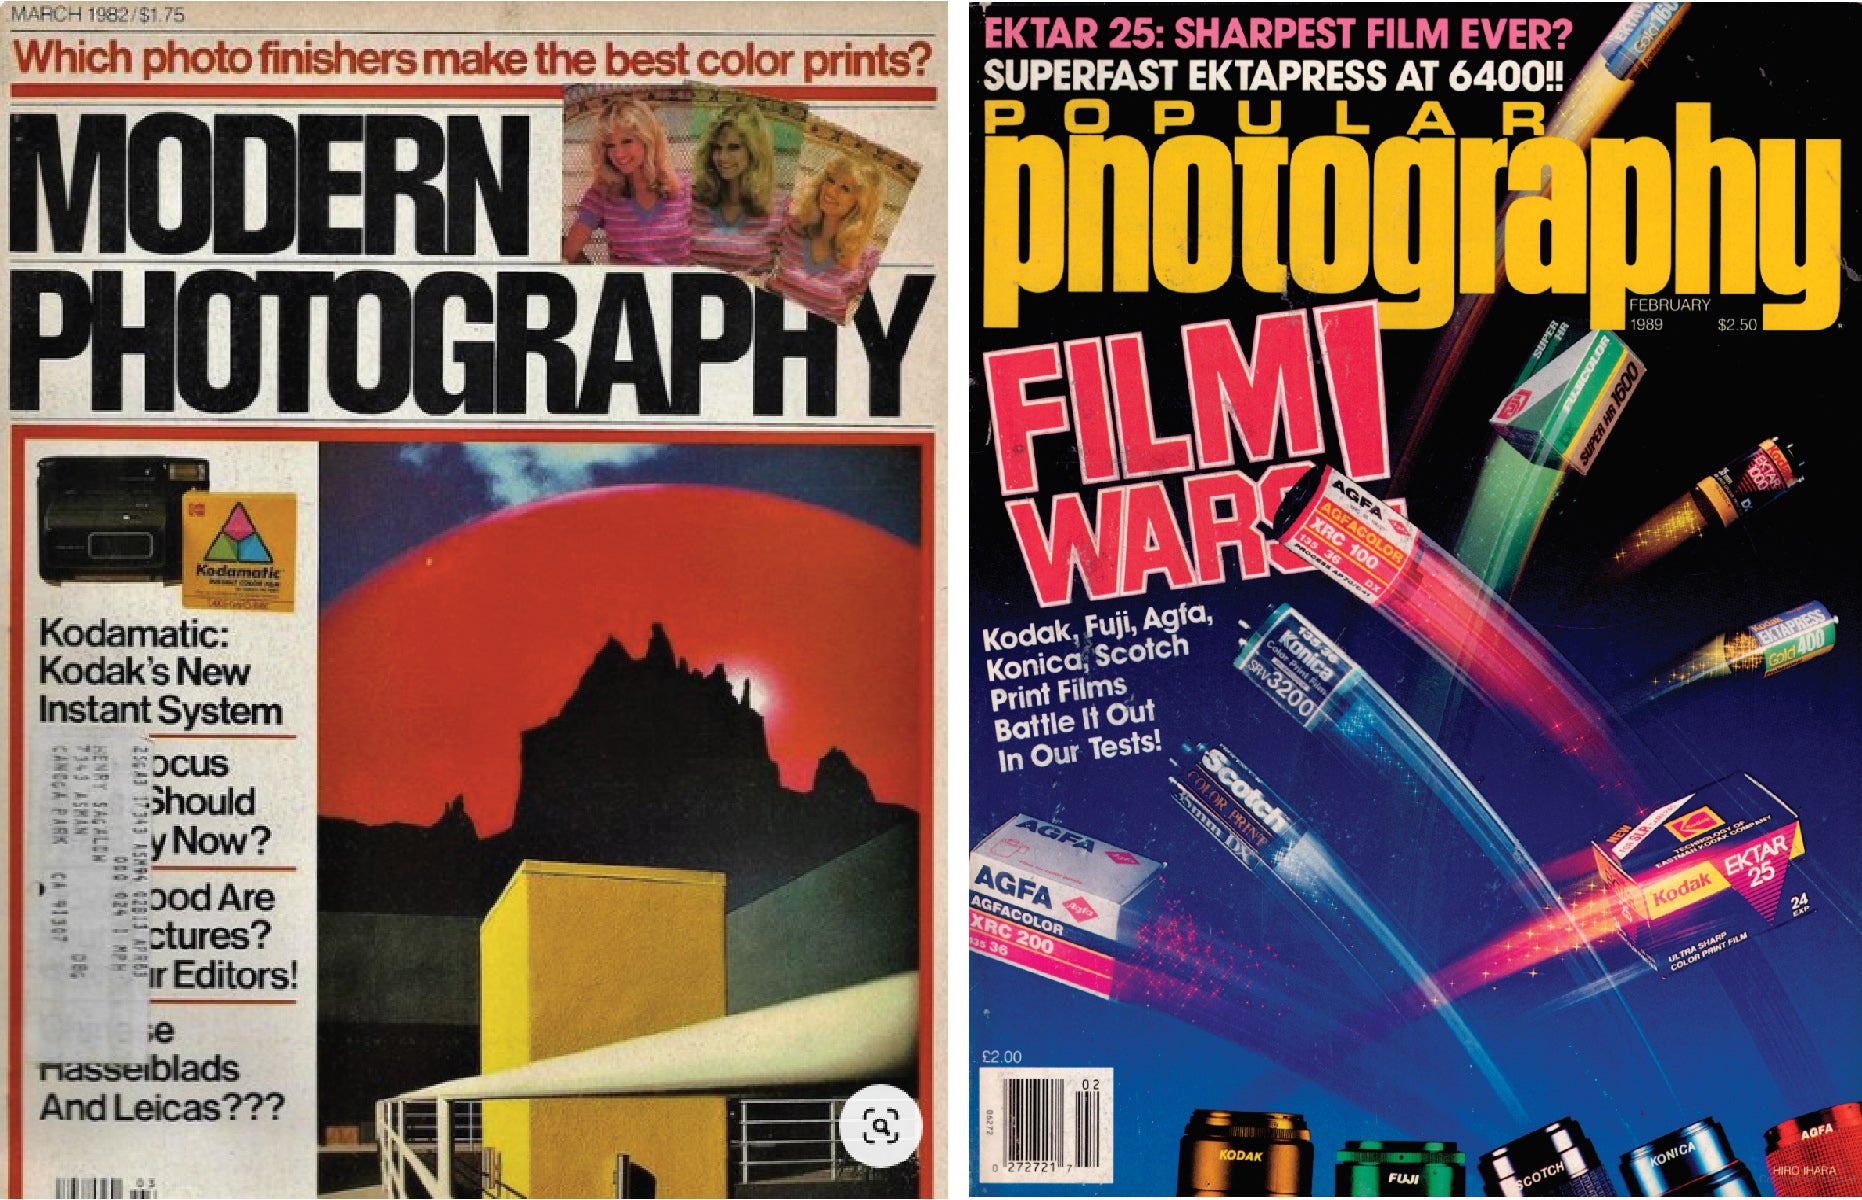 Covers of Modern Photography and Popular Photography